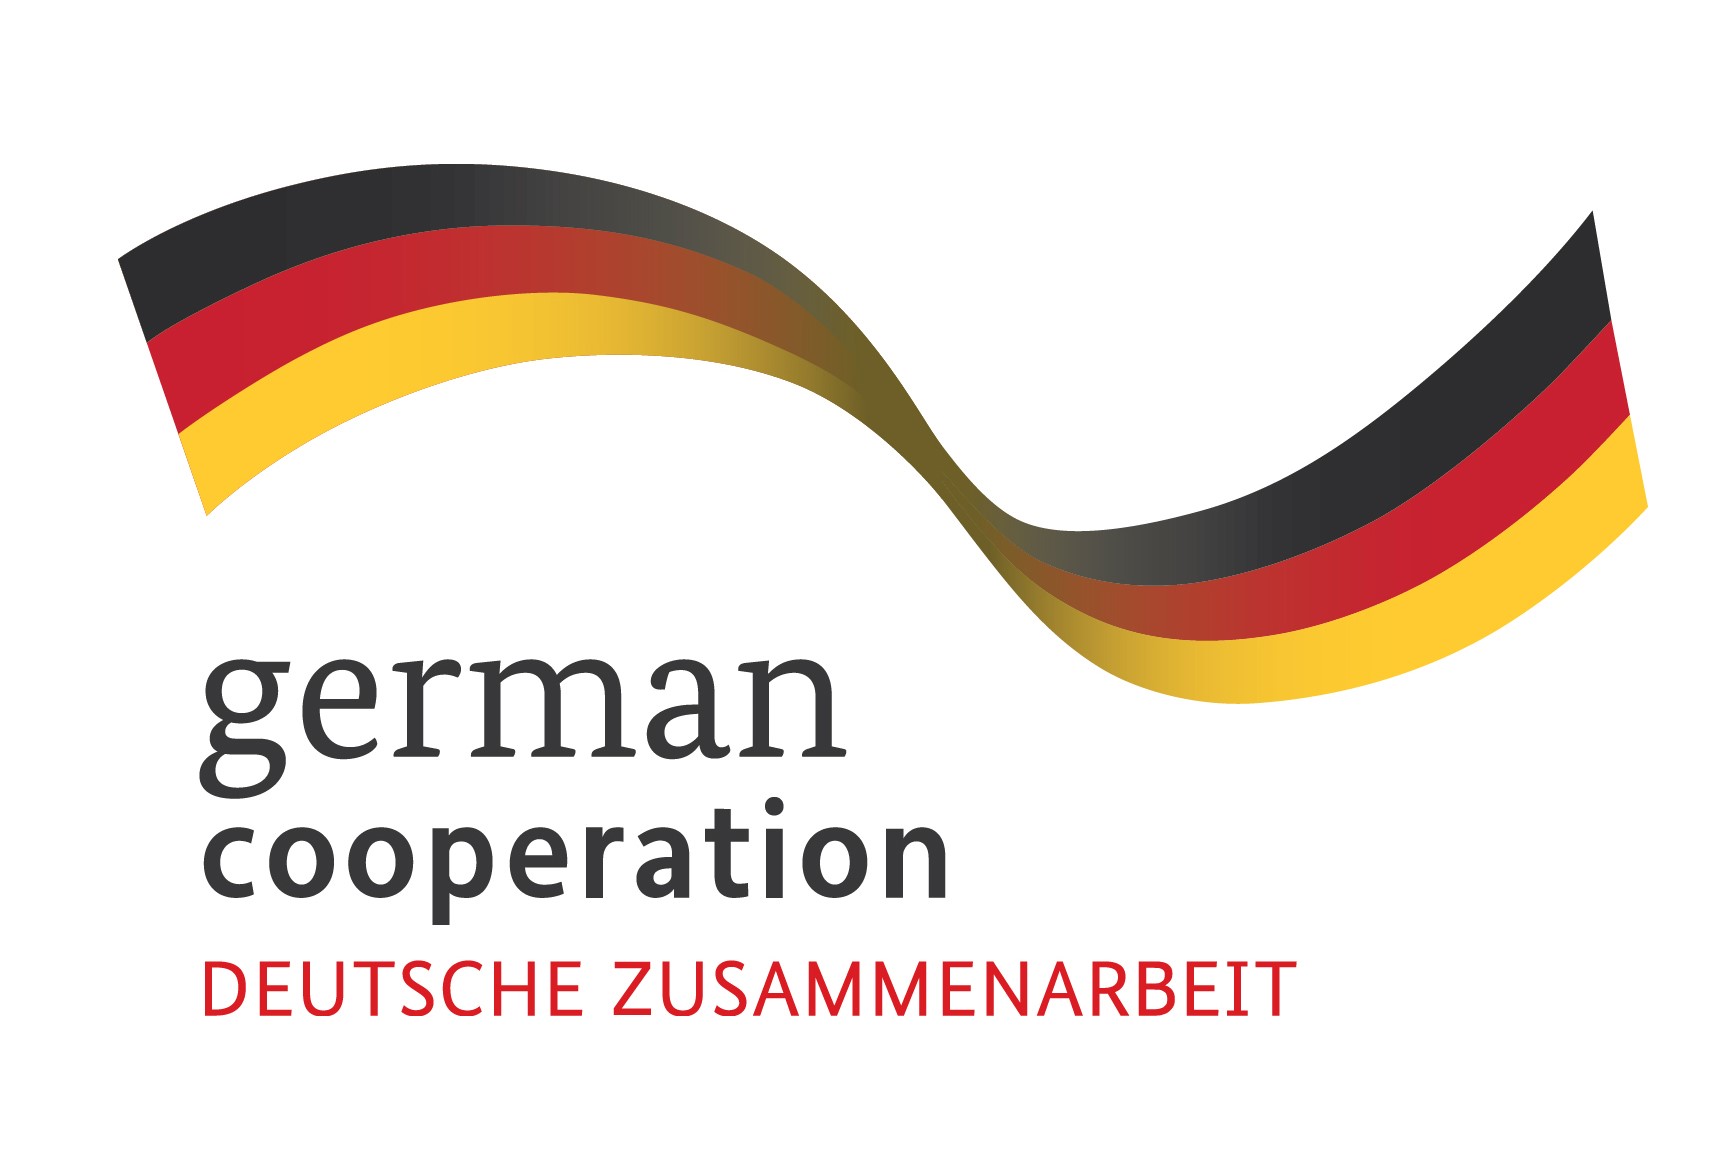 German Federal Ministry of Economic Cooperation and Development